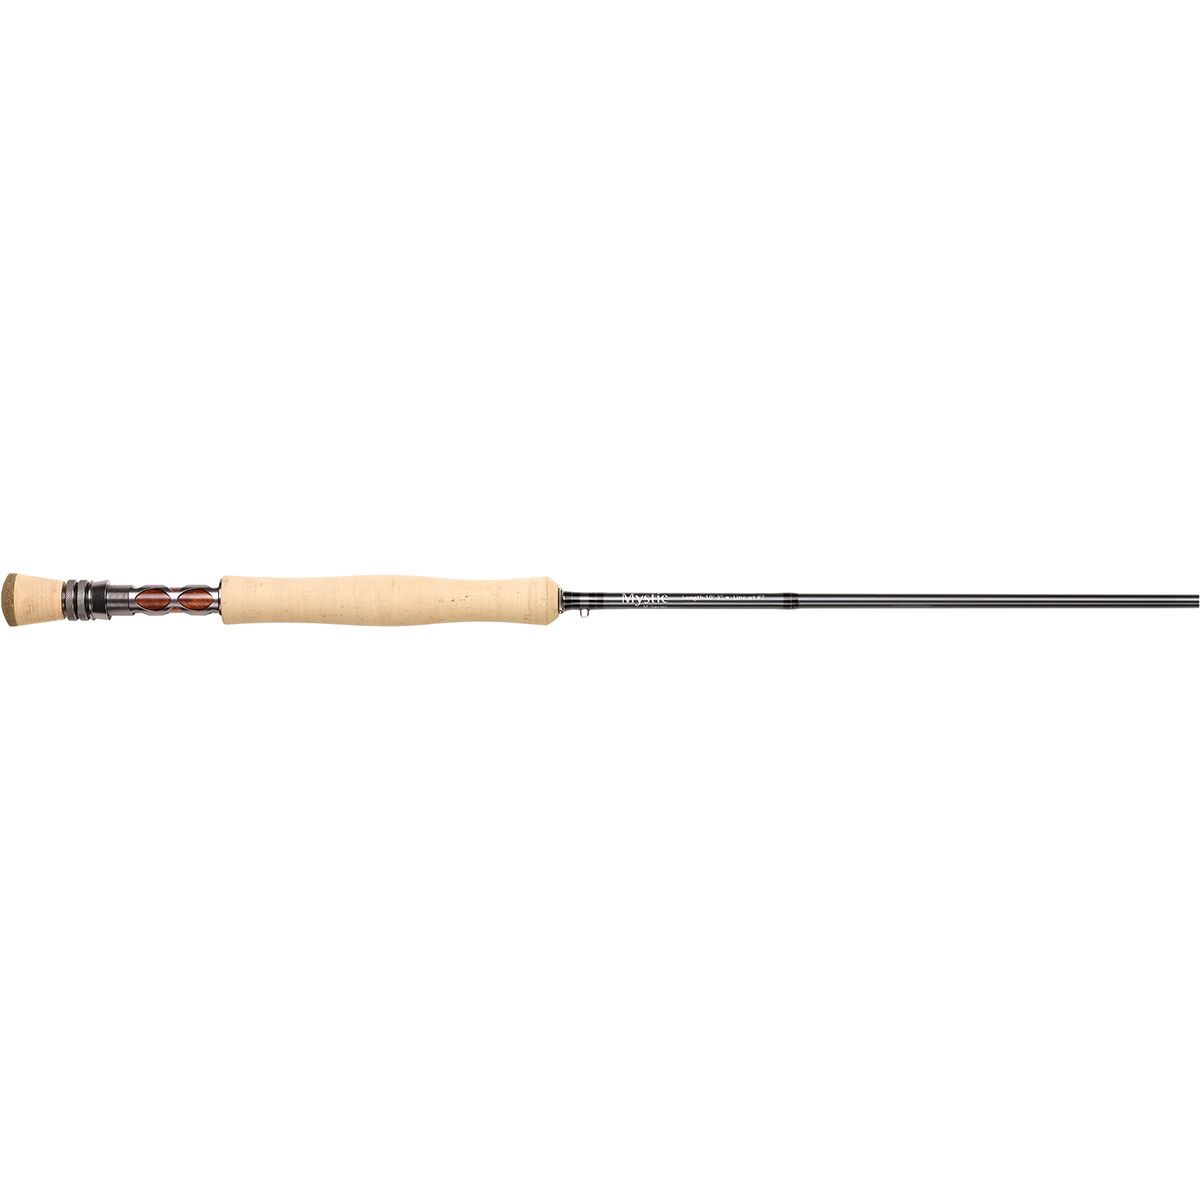 Mystic Rods M Series Fly Rod